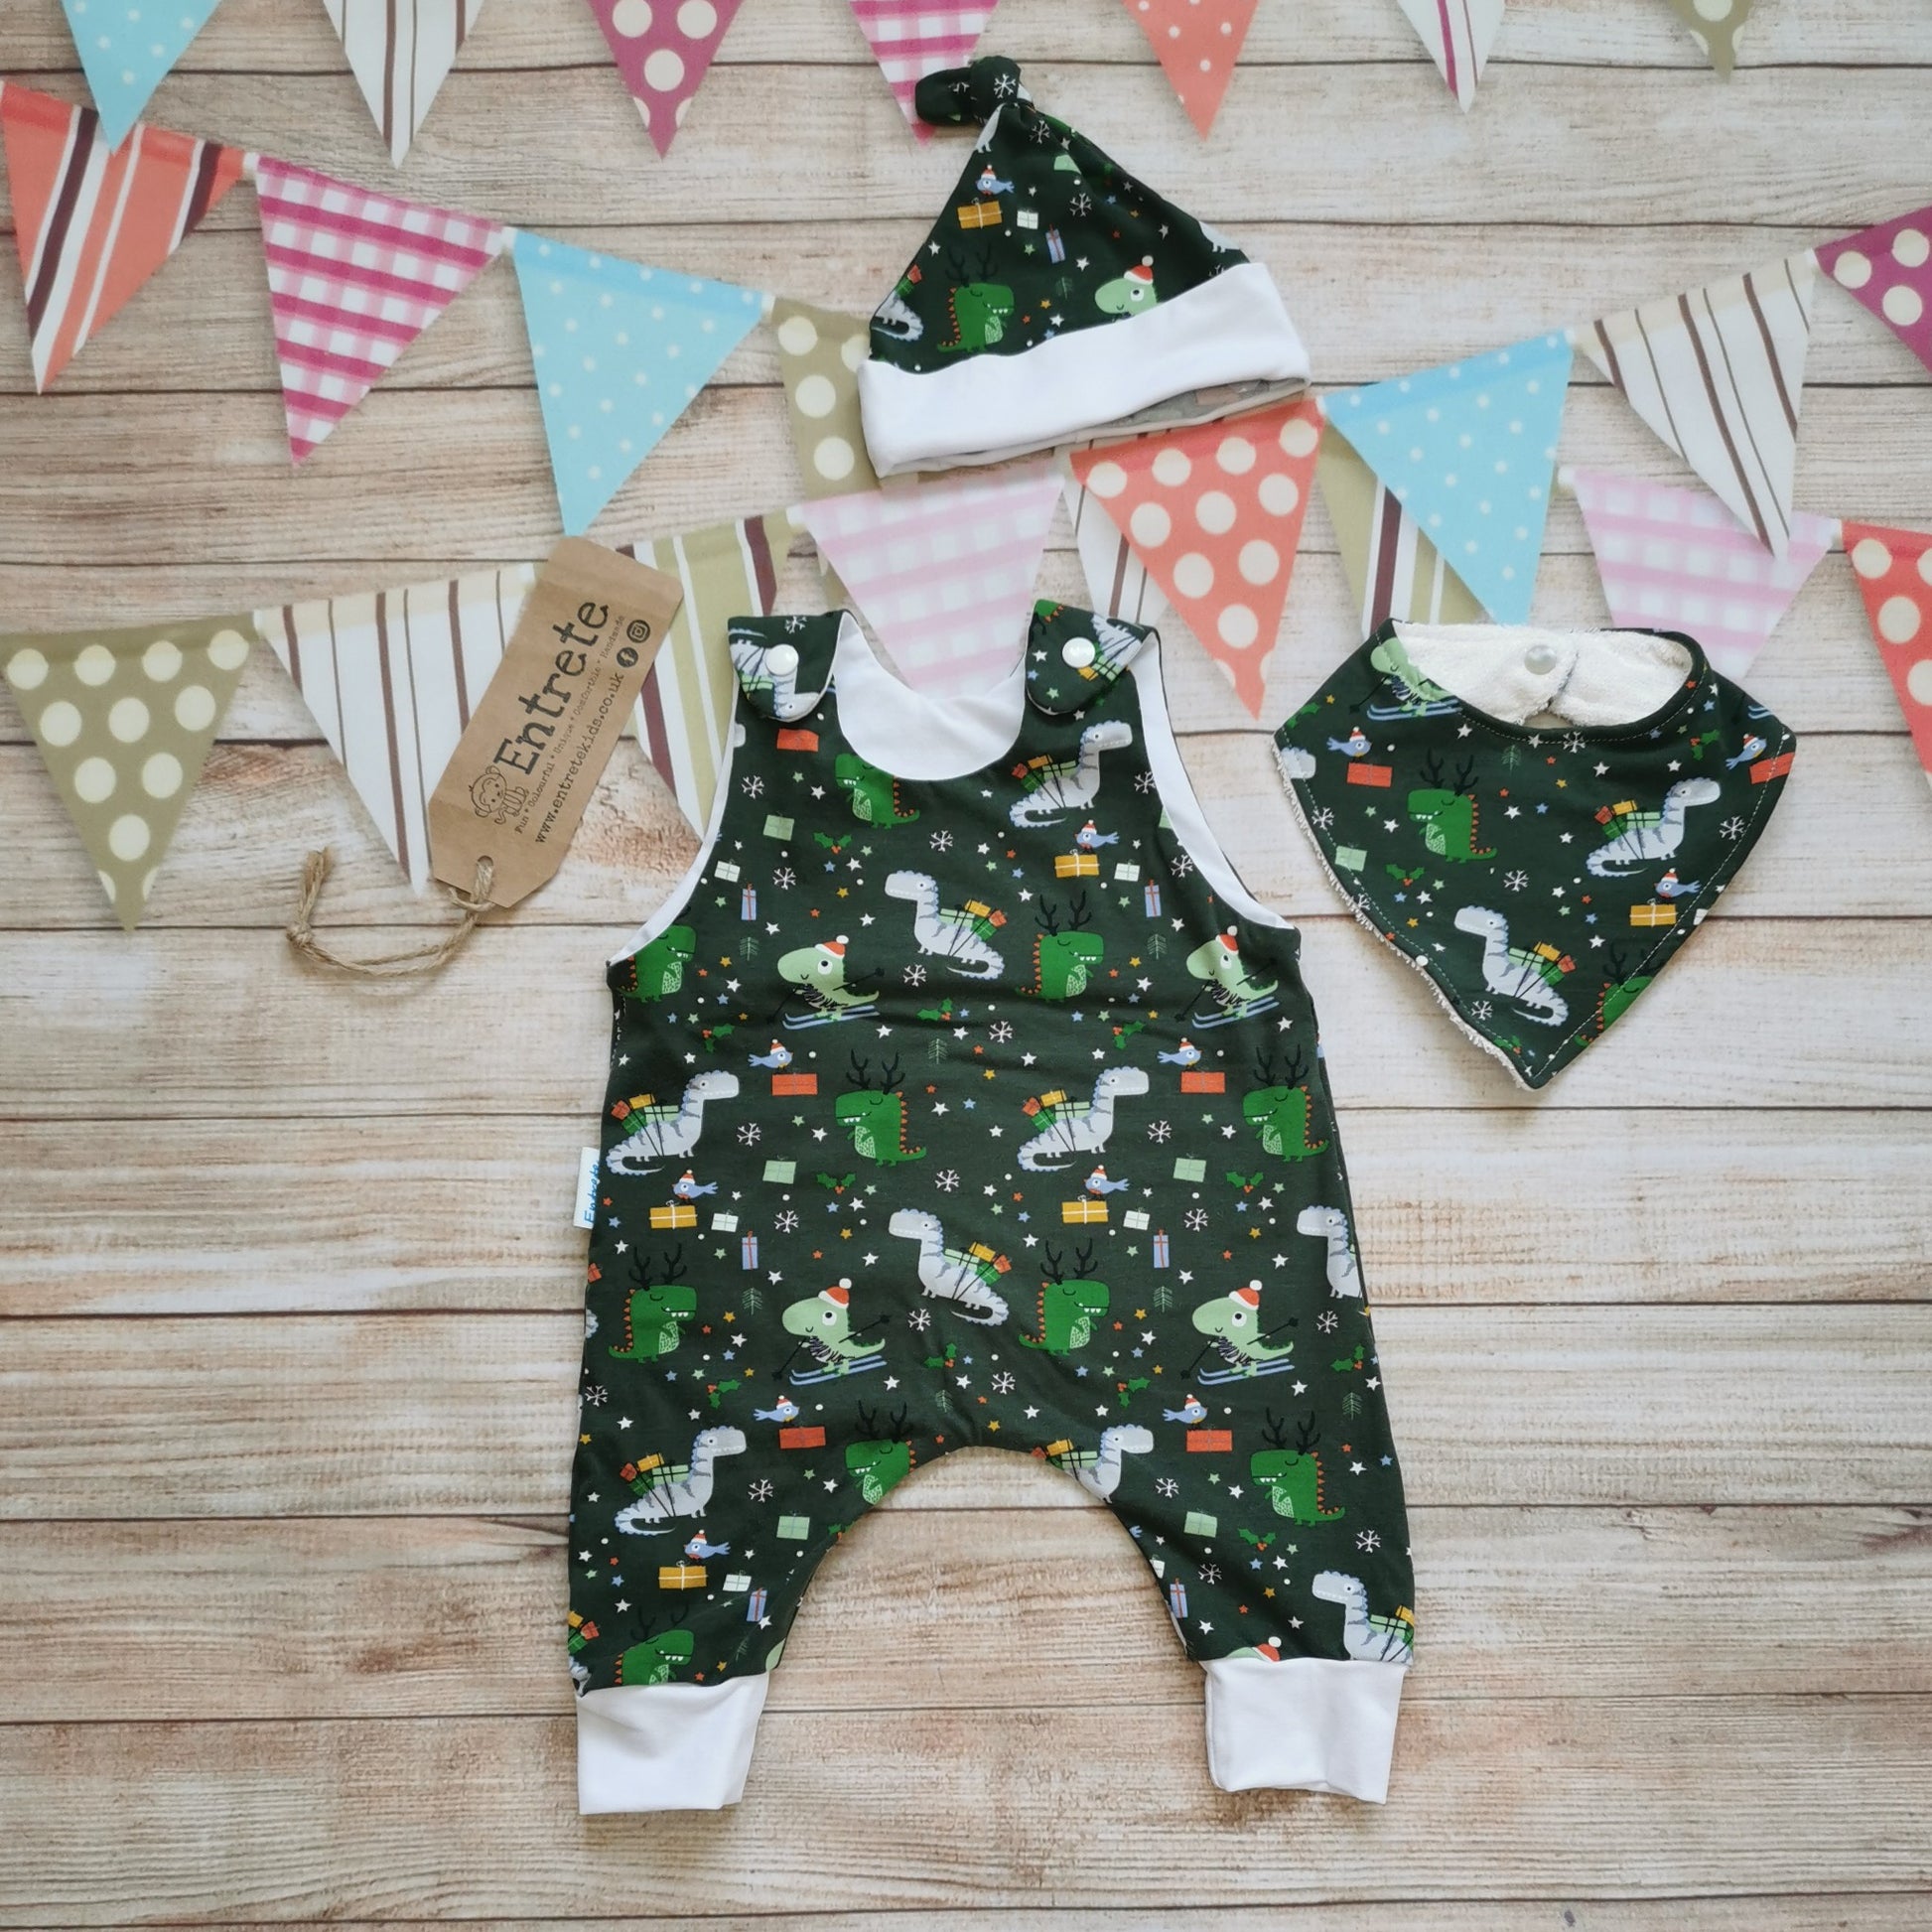 Soft and comfy sleeveless romper, handmade using the dark green festasaurus cotton jersey and white cotton jersey. The perfect Christmas gift for a little dinosaur fanatic! Shown with a matching hat and bamboo bib (sold separately)